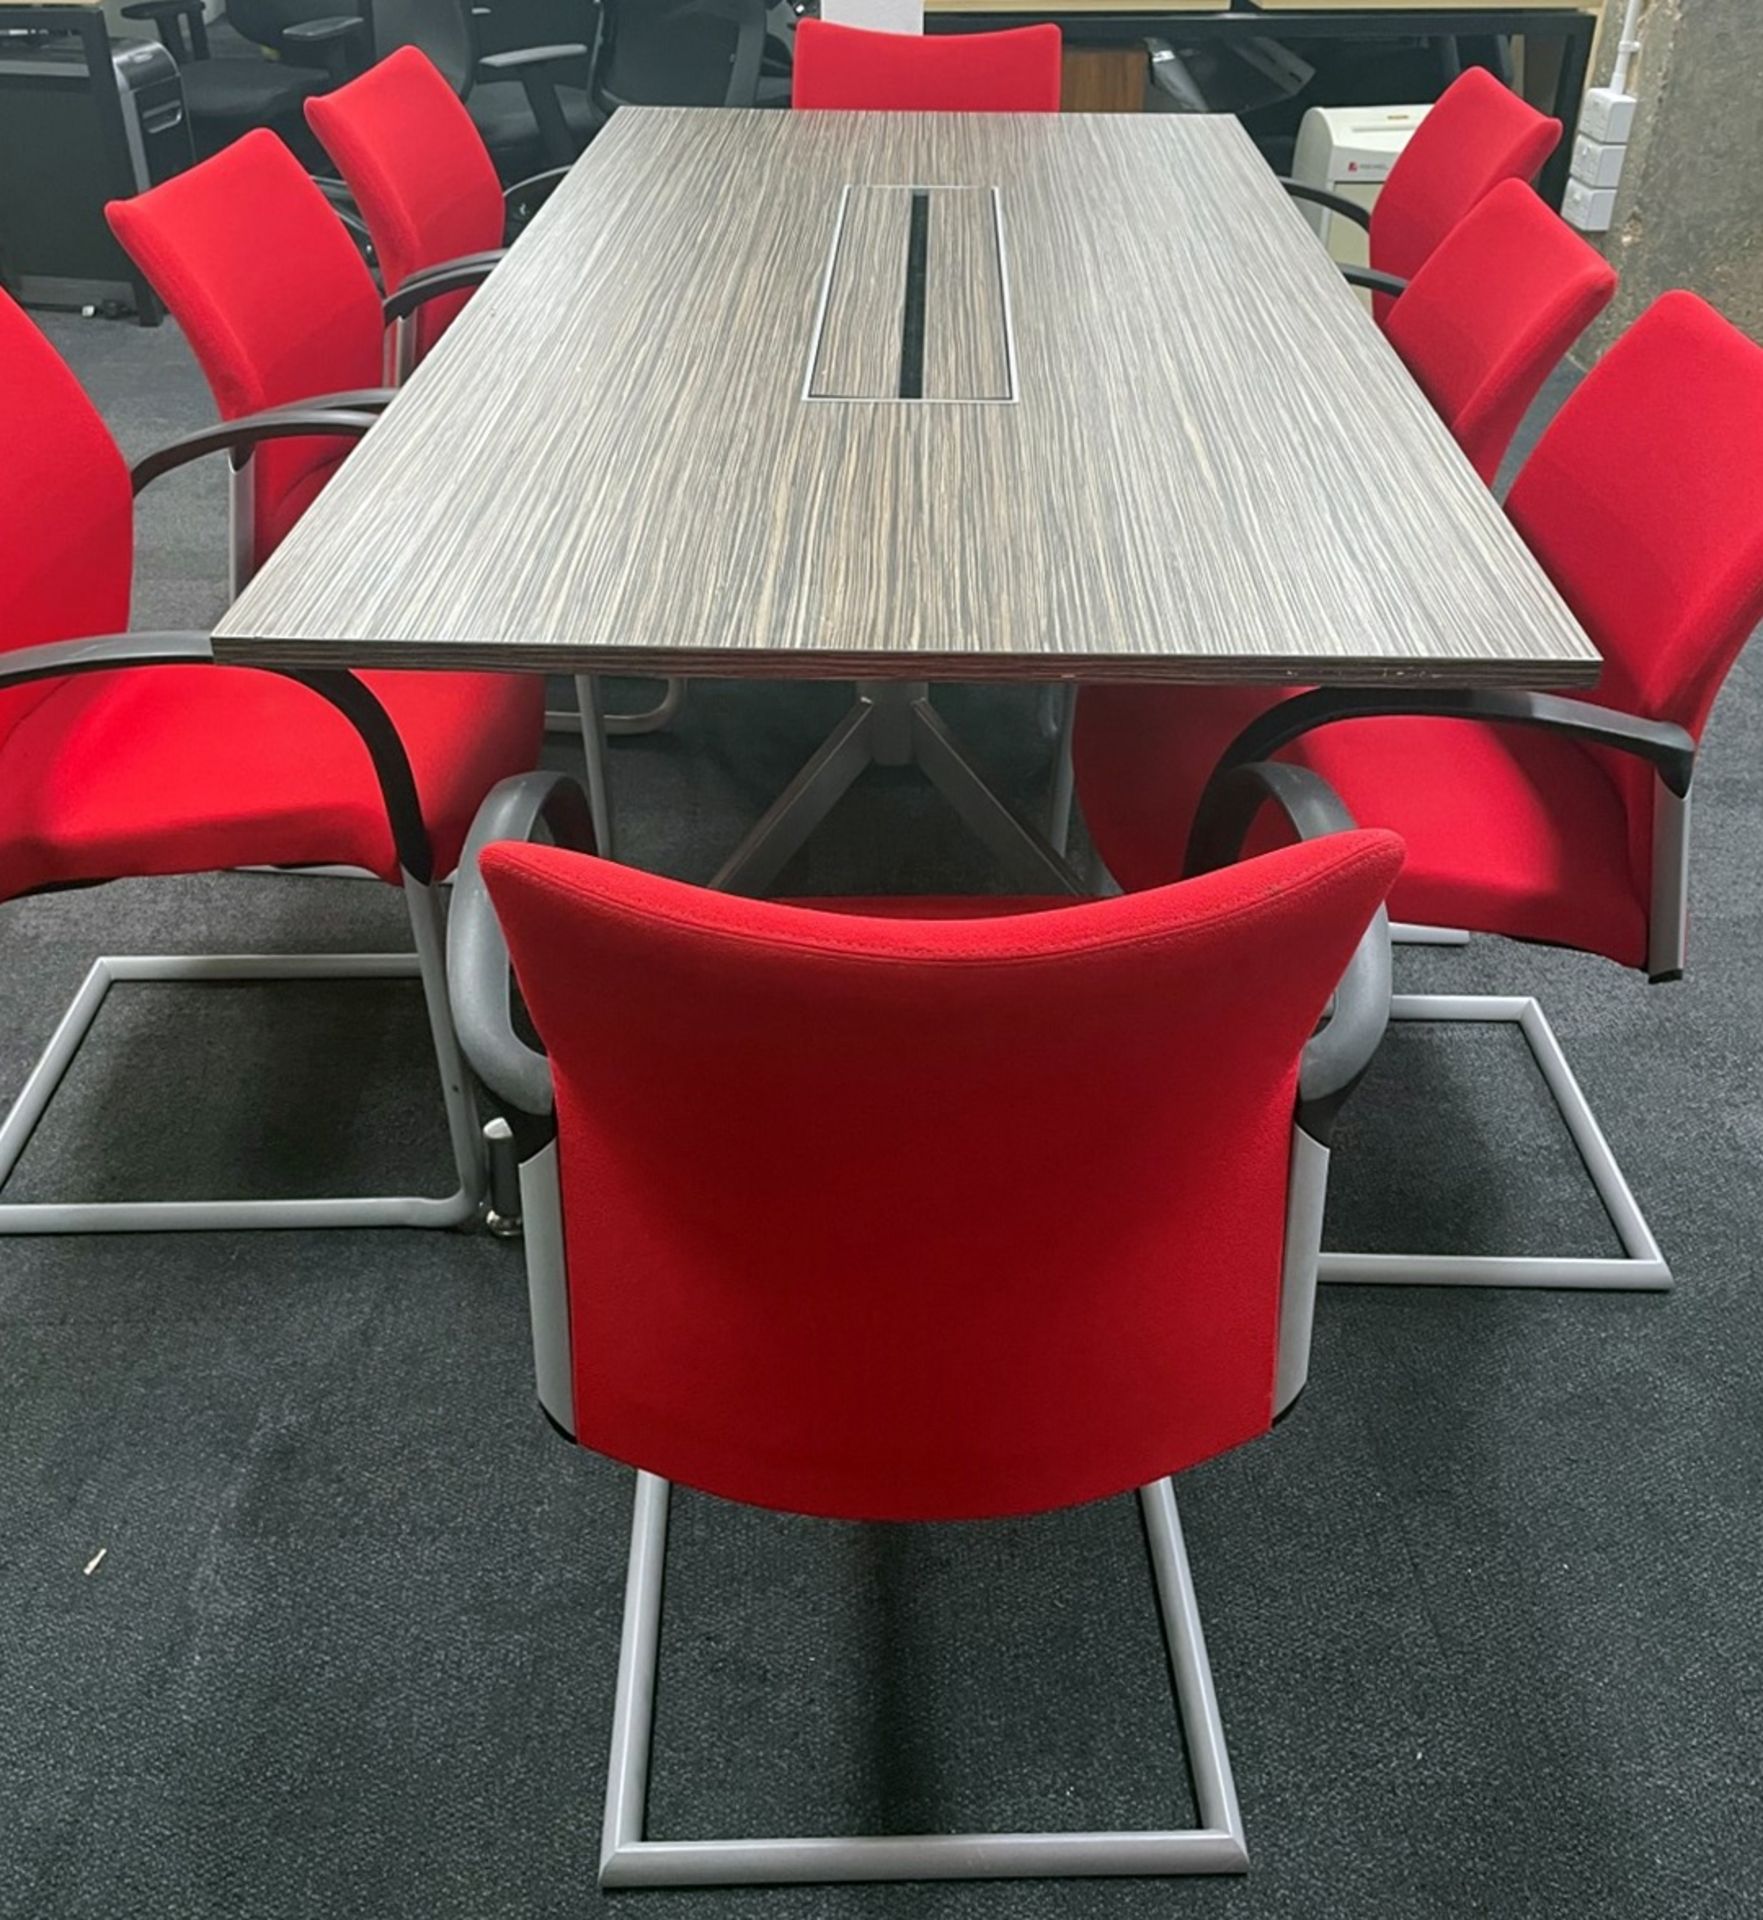 1 x 2-Metre Long Boardroom Table With 8 x Red Senator Chairs - To Be Removed From An Executive - Image 2 of 18